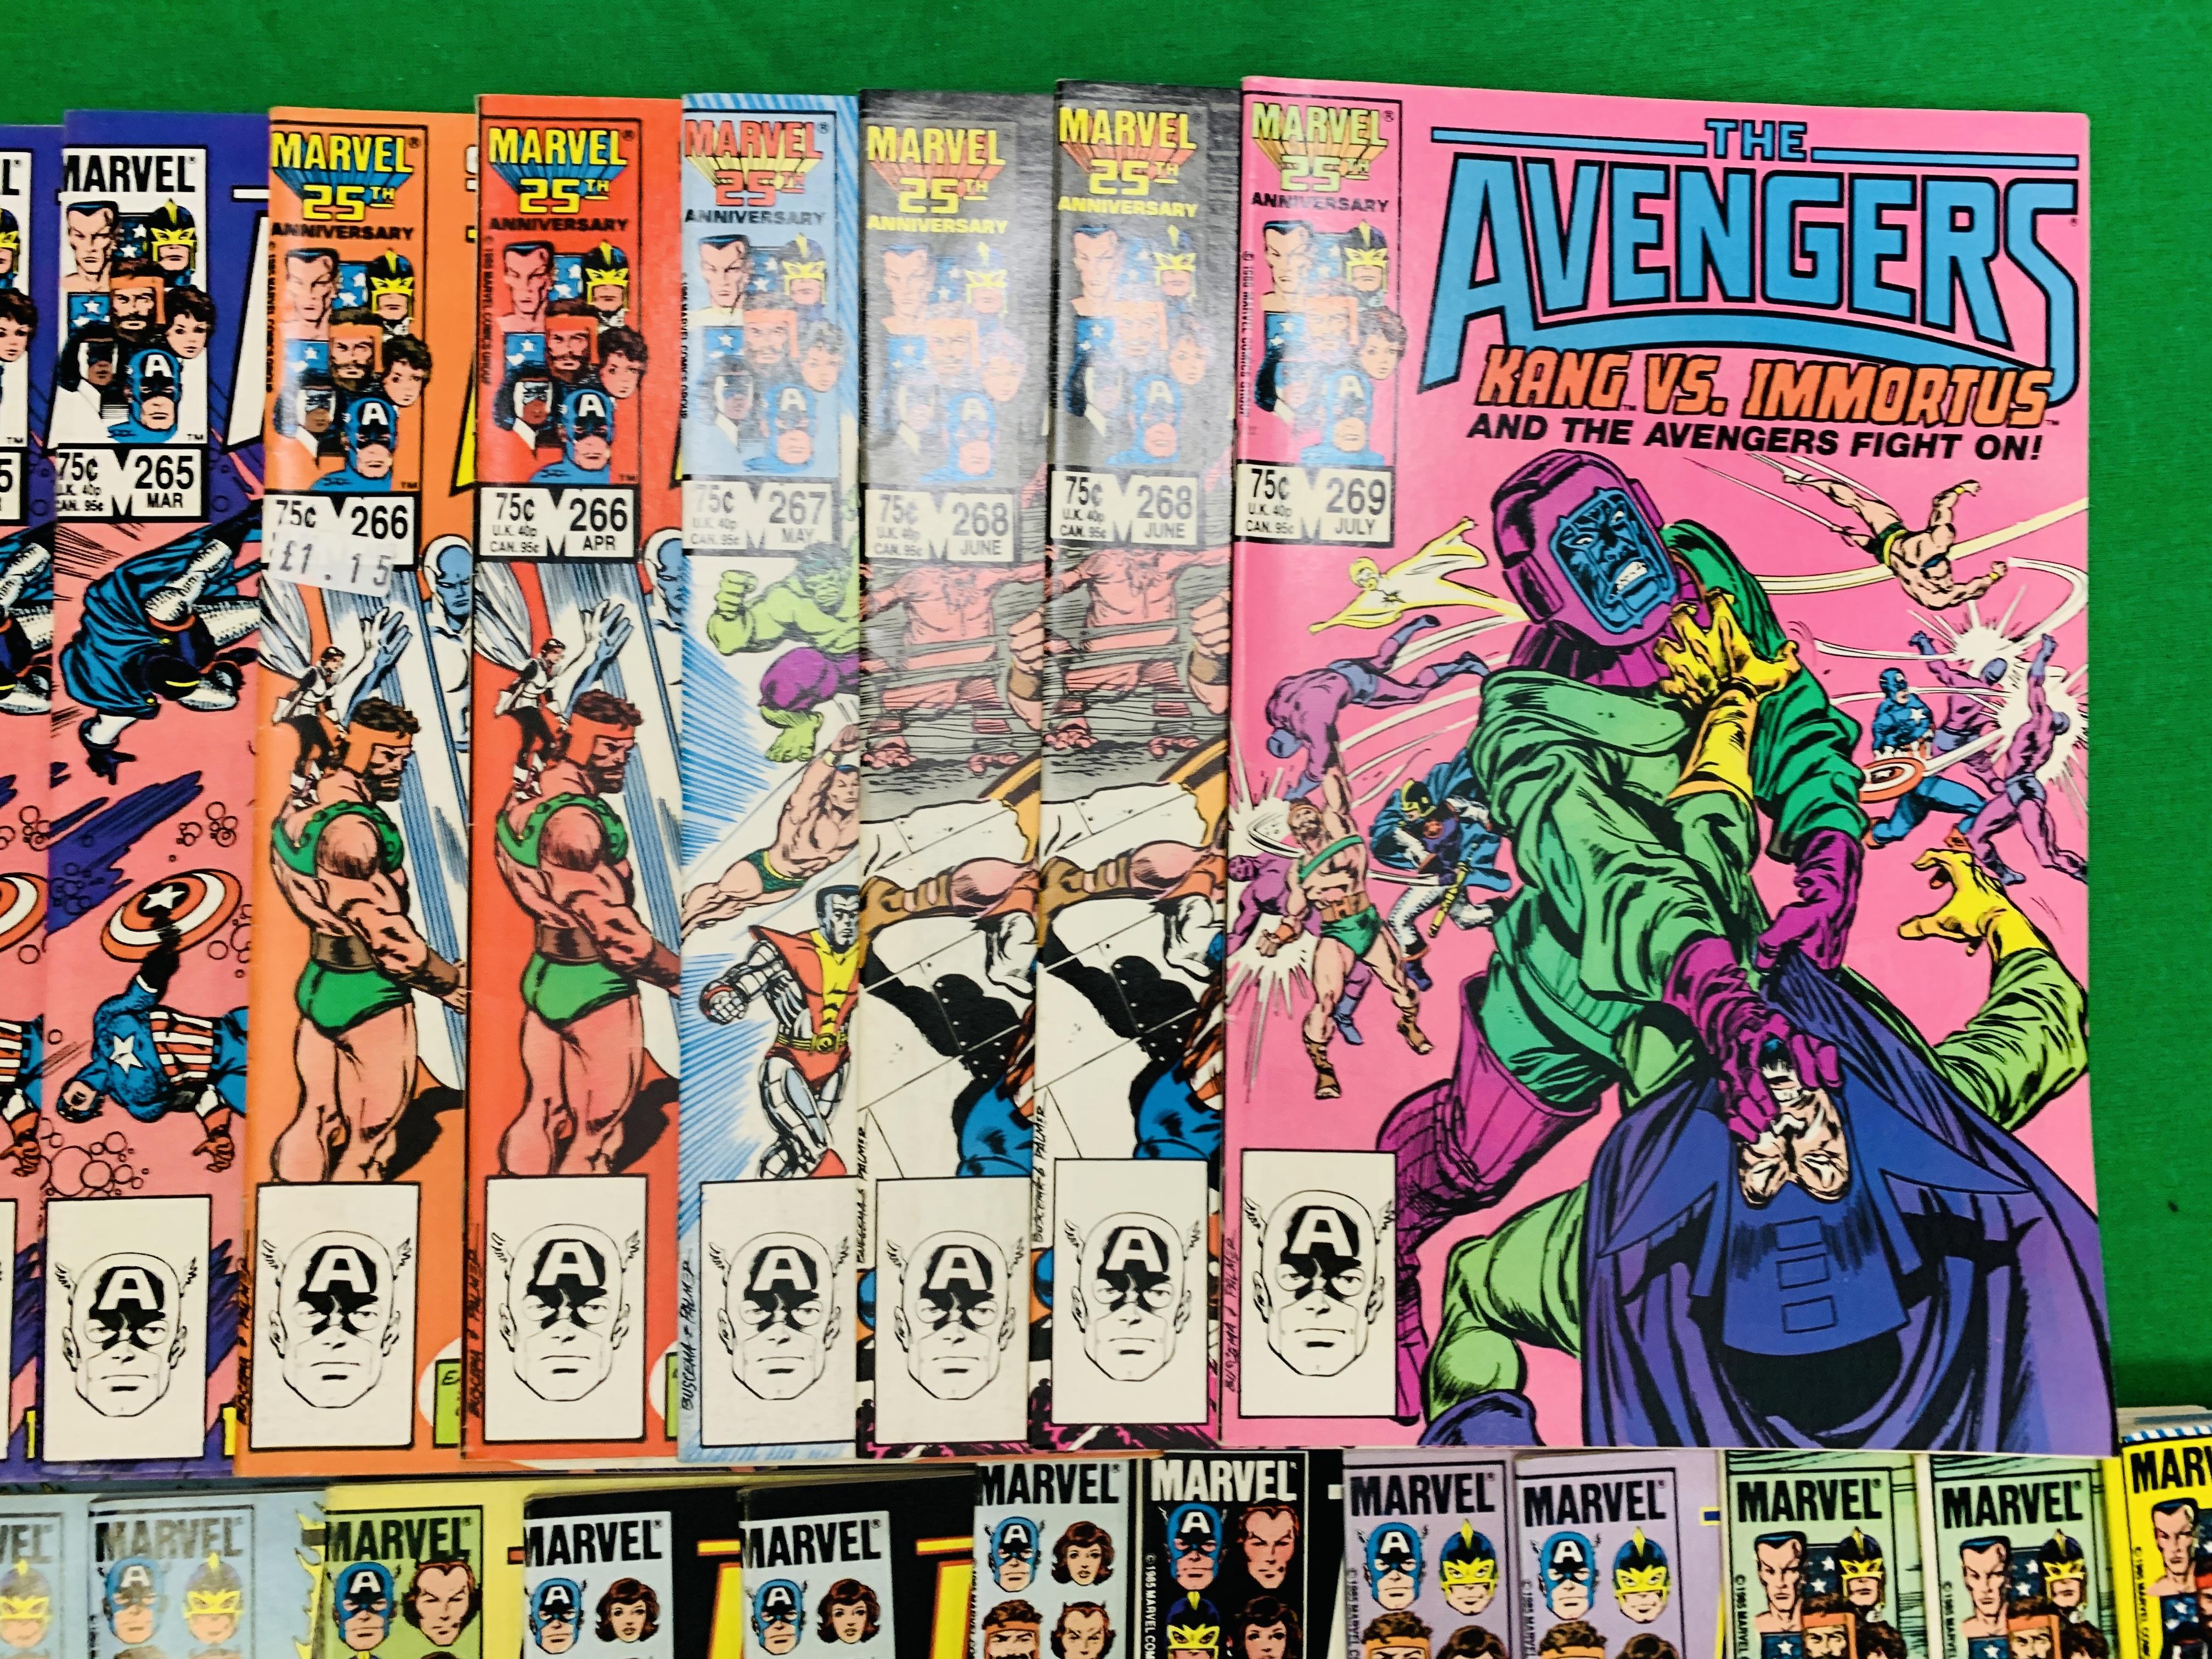 MARVEL COMICS THE AVENGERS NO. 101 - 299, MISSING ISSUES 103 AND 110. - Image 116 of 130